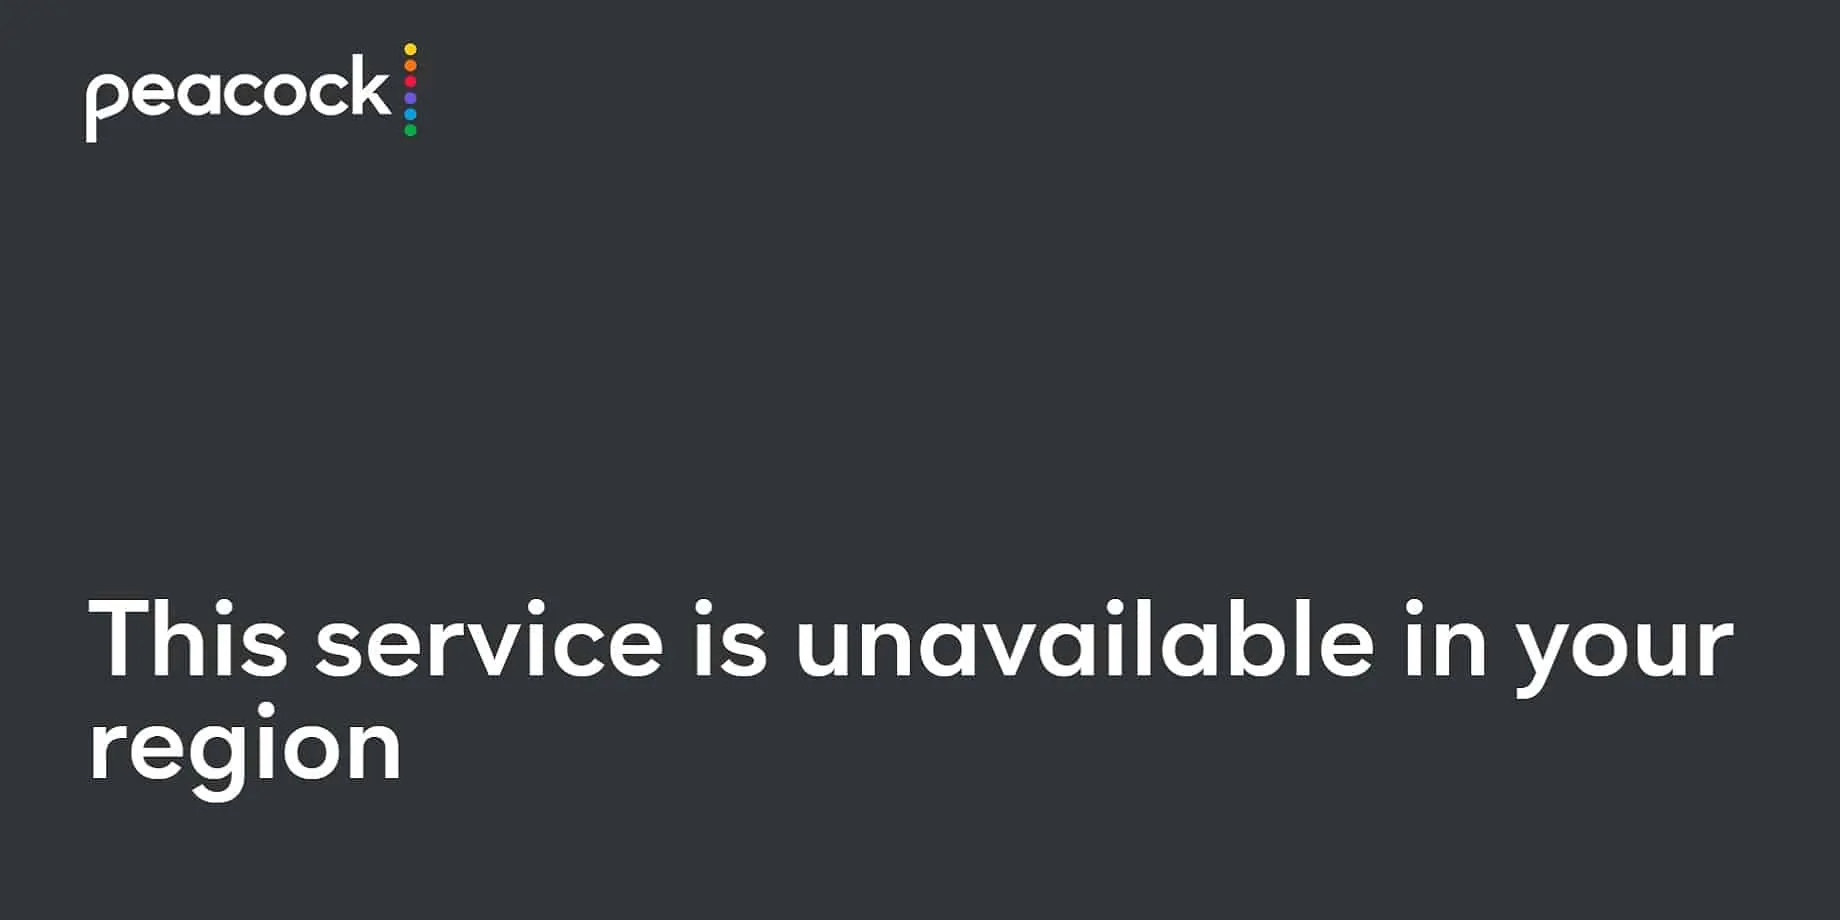 Peacock - This service is unavailable in your region